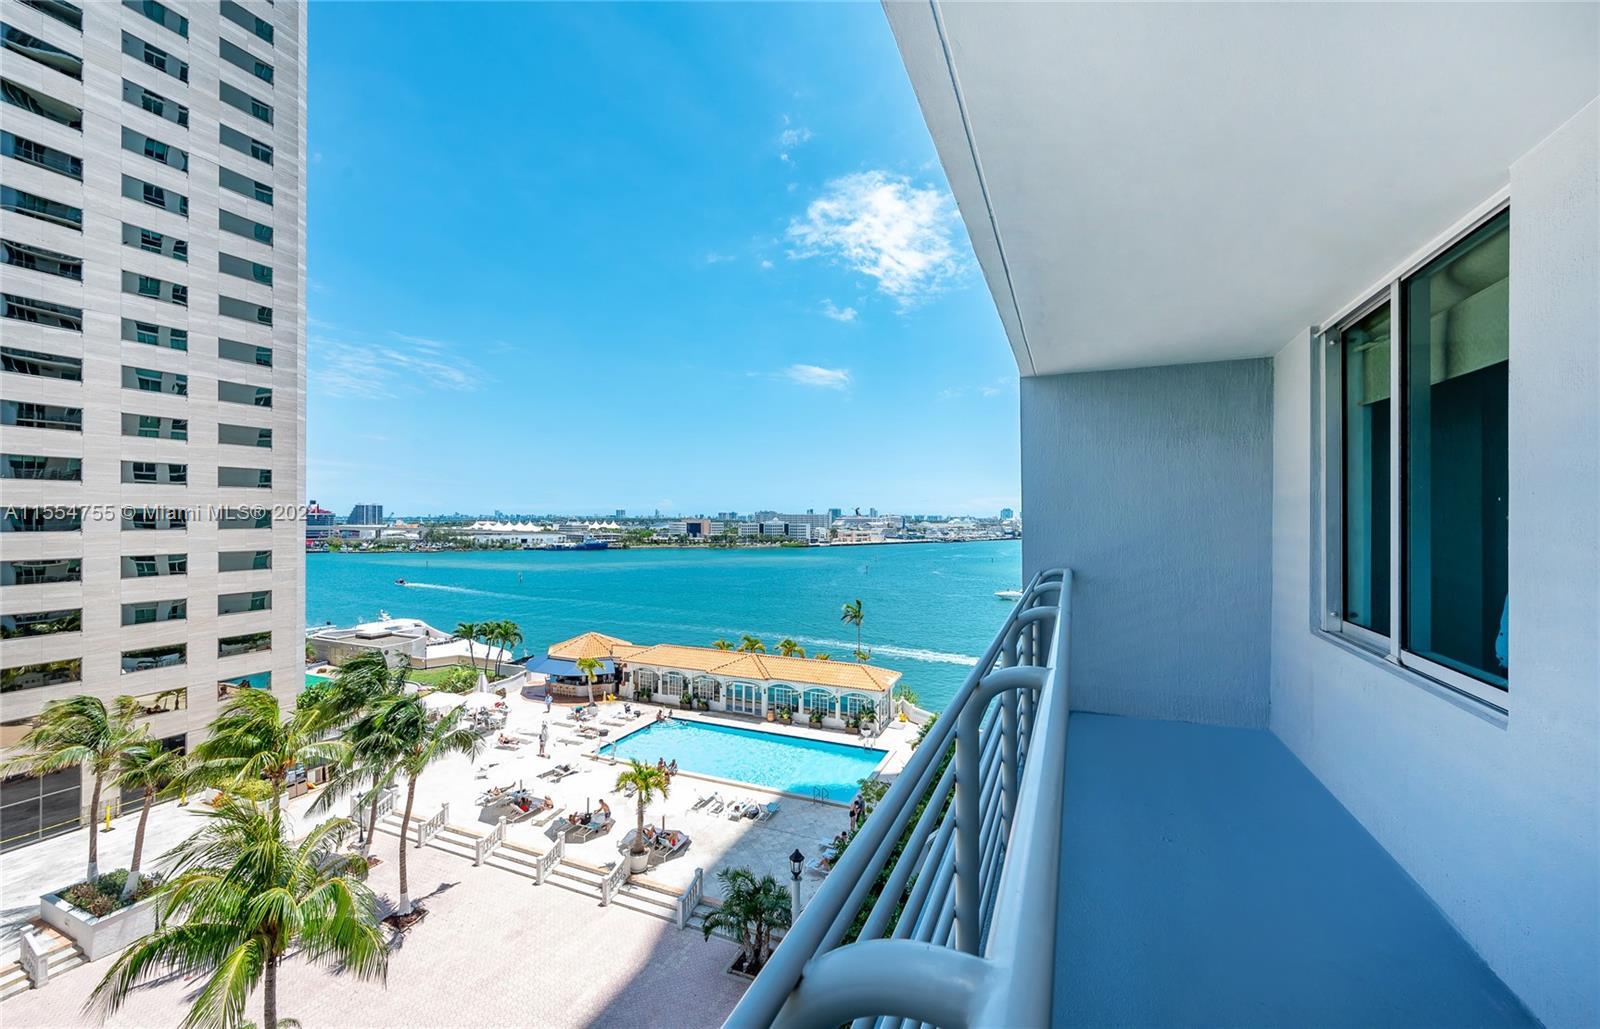 Don't miss this incredible opportunity to enjoy waterfront living in one of Miami's most desirable B